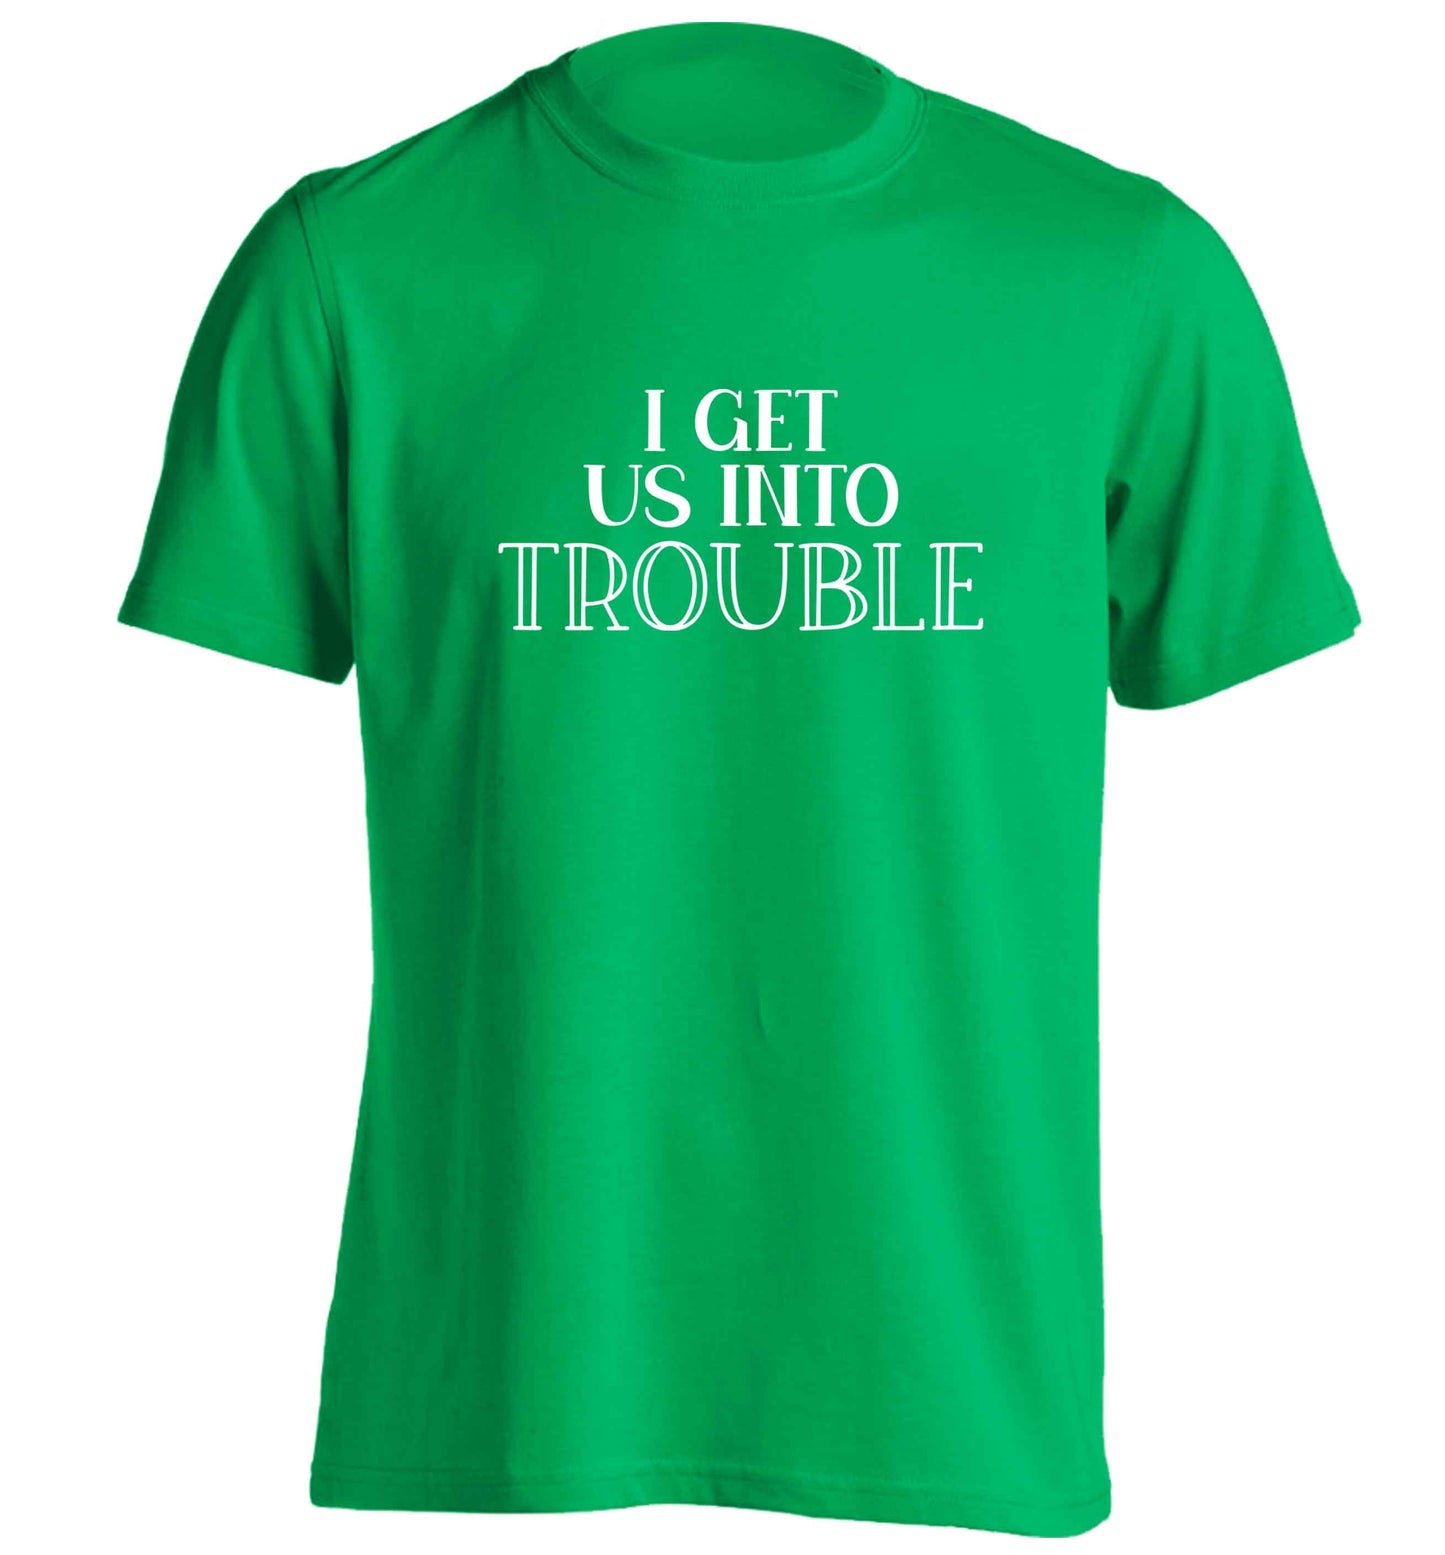 I get us into trouble adults unisex green Tshirt 2XL